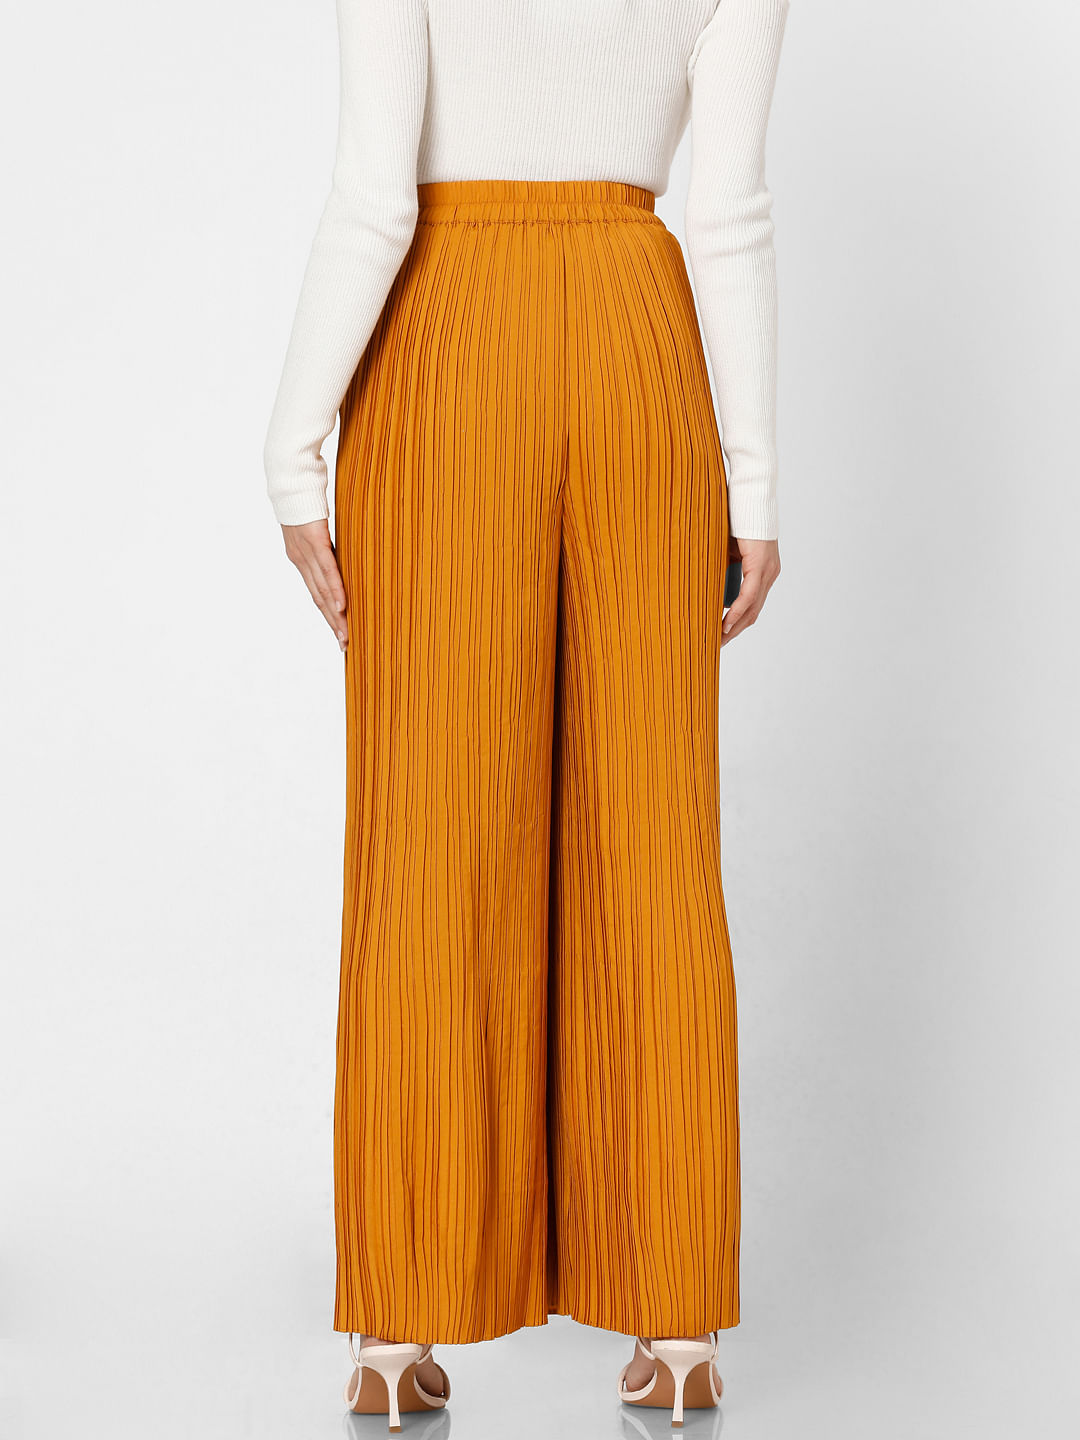 Solid Color Wide Leg Pants for Women Plus Size Pleated Floor Length Trousers  Winter Baggy Casual Pant with Pockets - Walmart.com